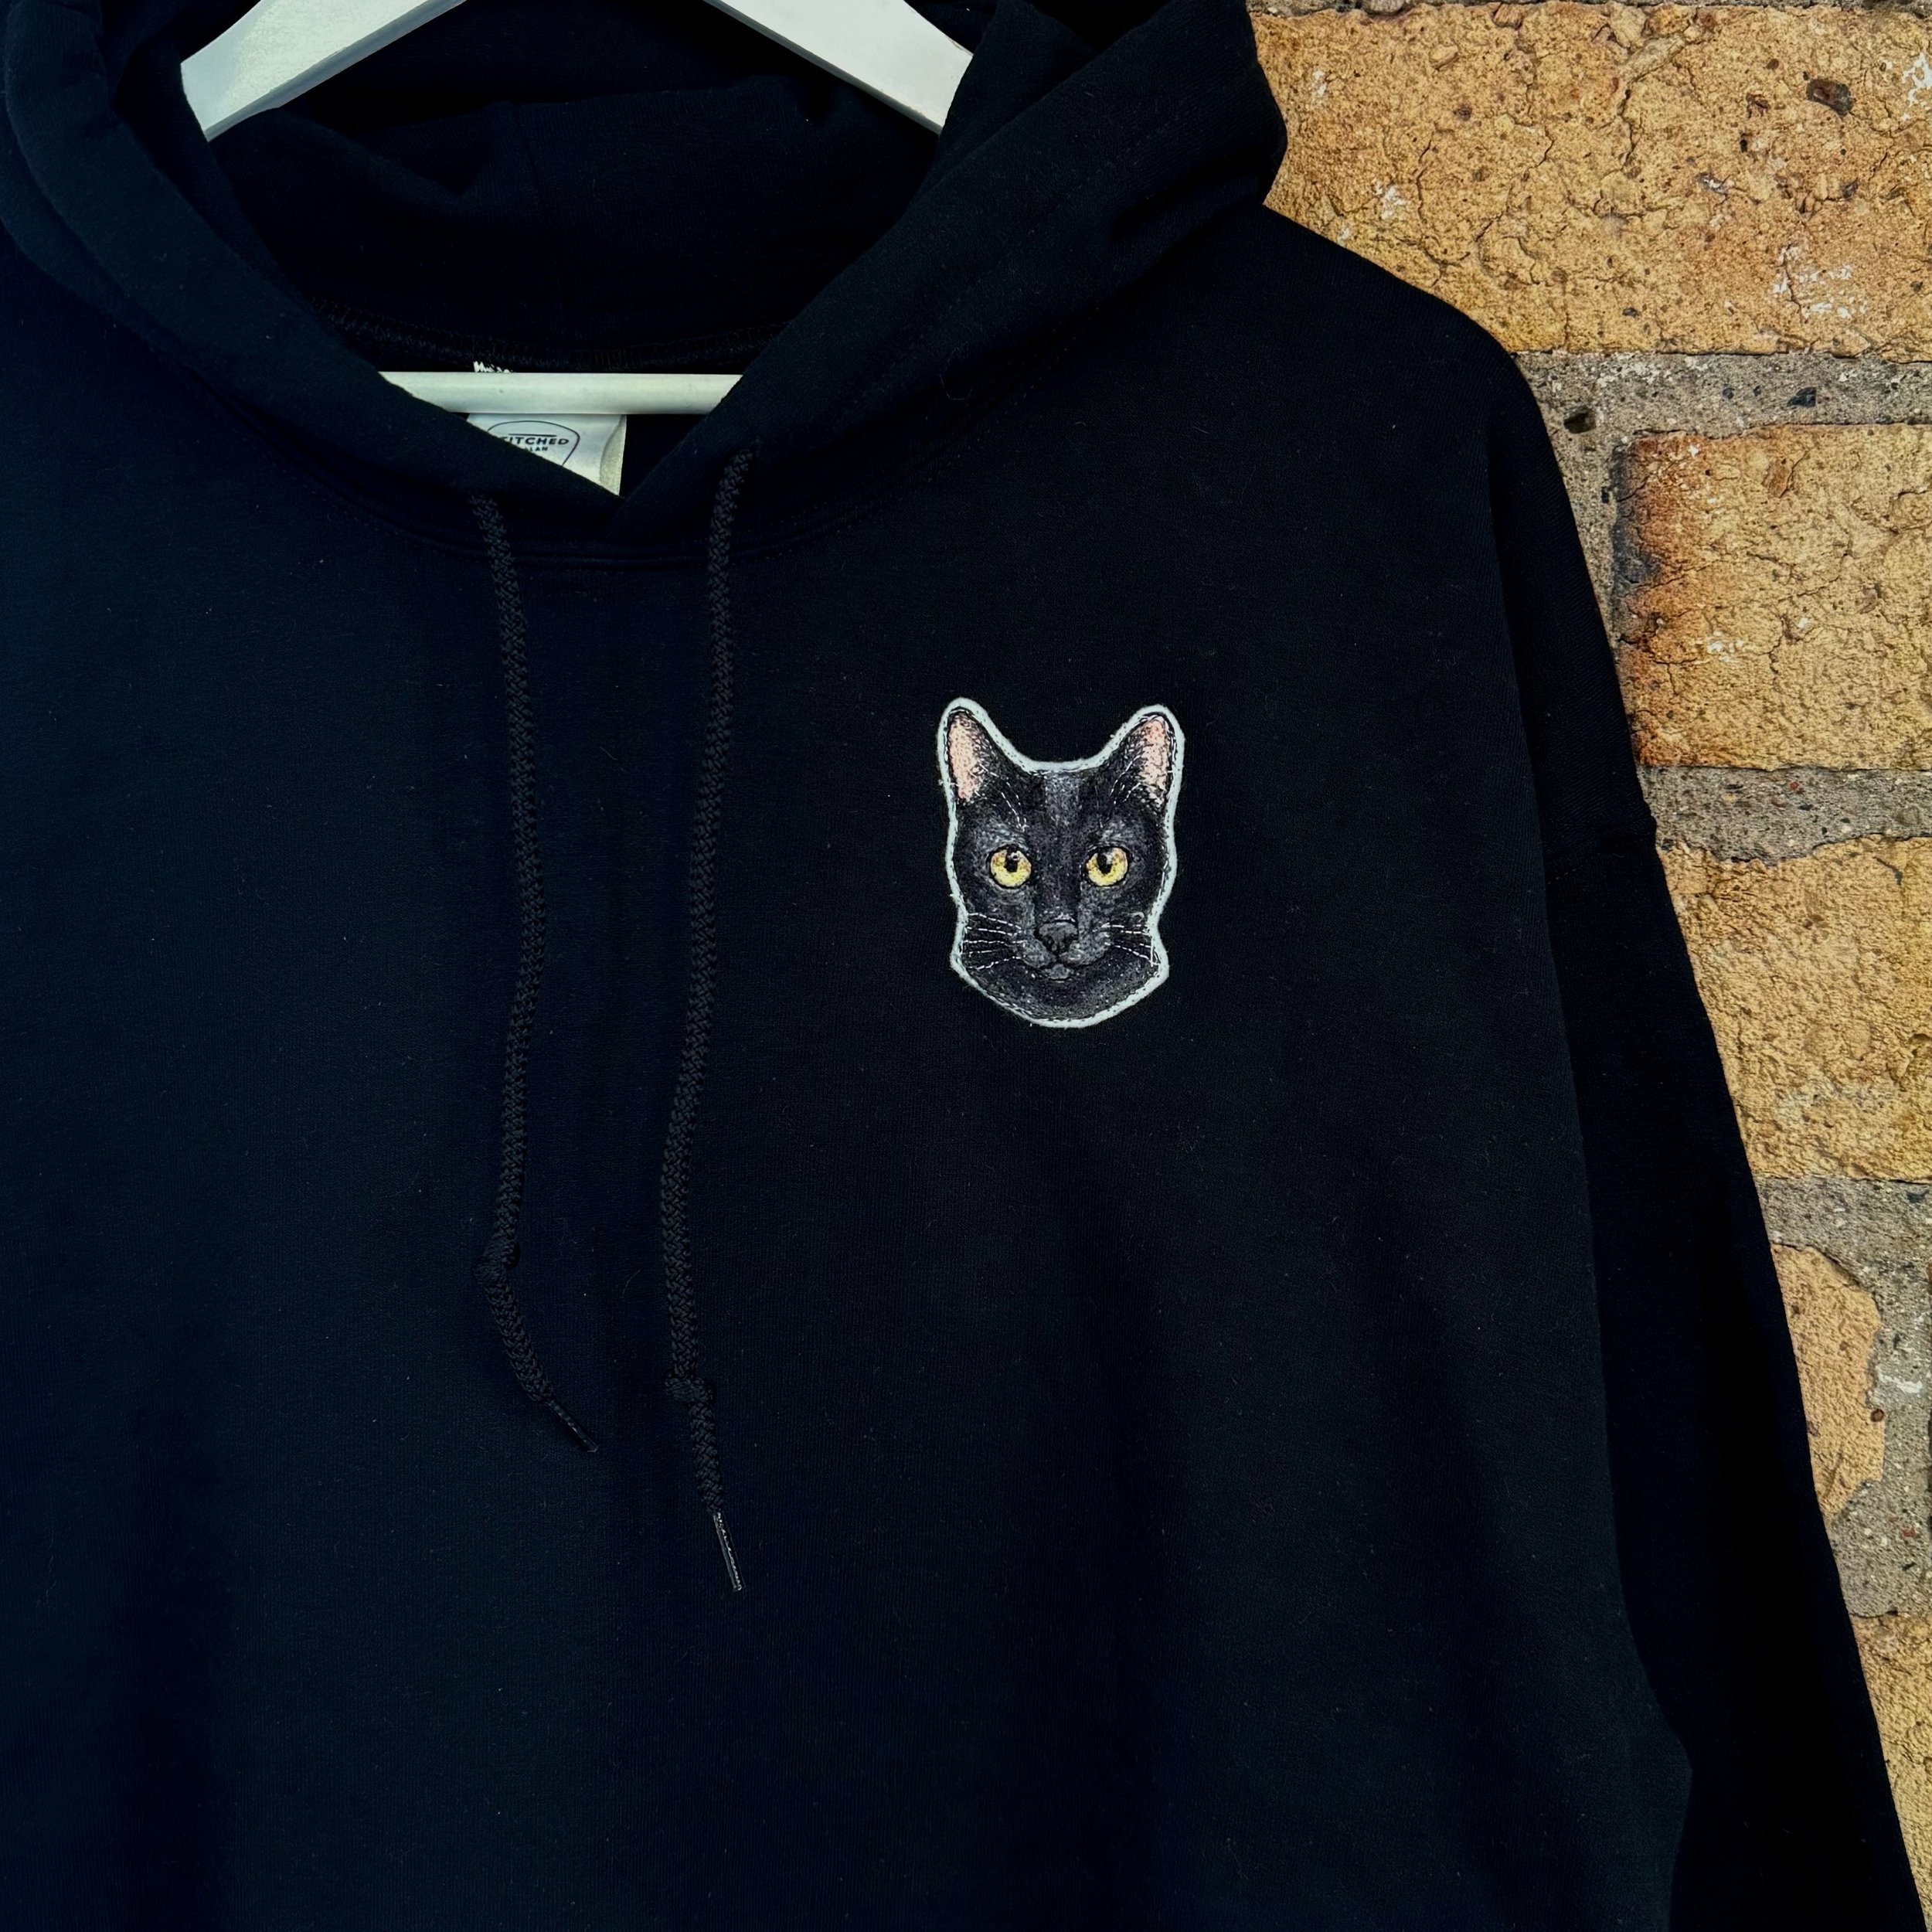 Love how much this little guys eyes pop on this black hoodie! 👀

#cat #embroidery #freehandembroidery #artist #maker #smallbusiness #shopsmall #art #sewing #commission  #blackcat #kitty